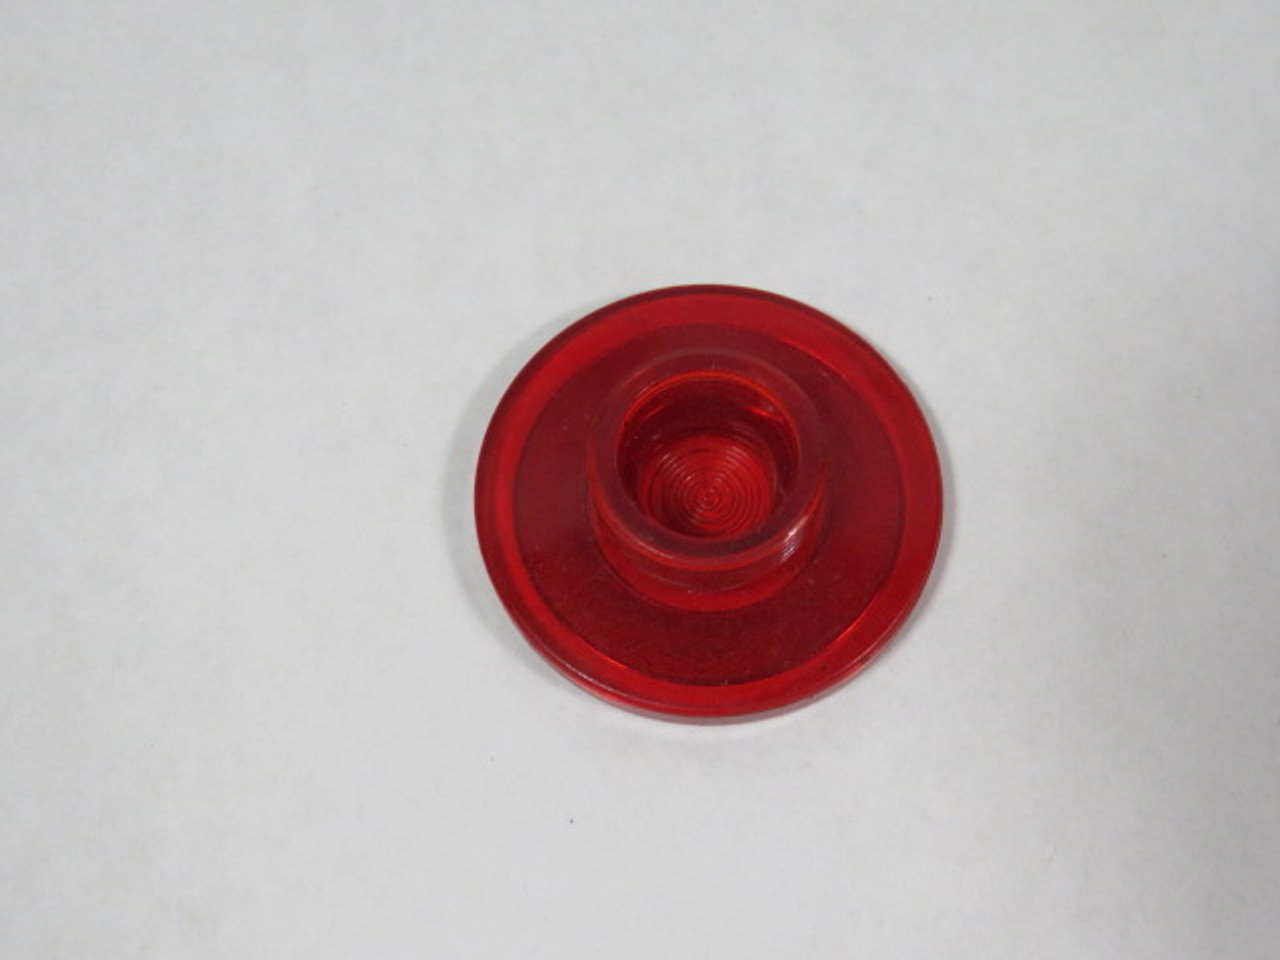 Cutler-Hammer 10250TC47 Red Lens for Push-Pull Units USED